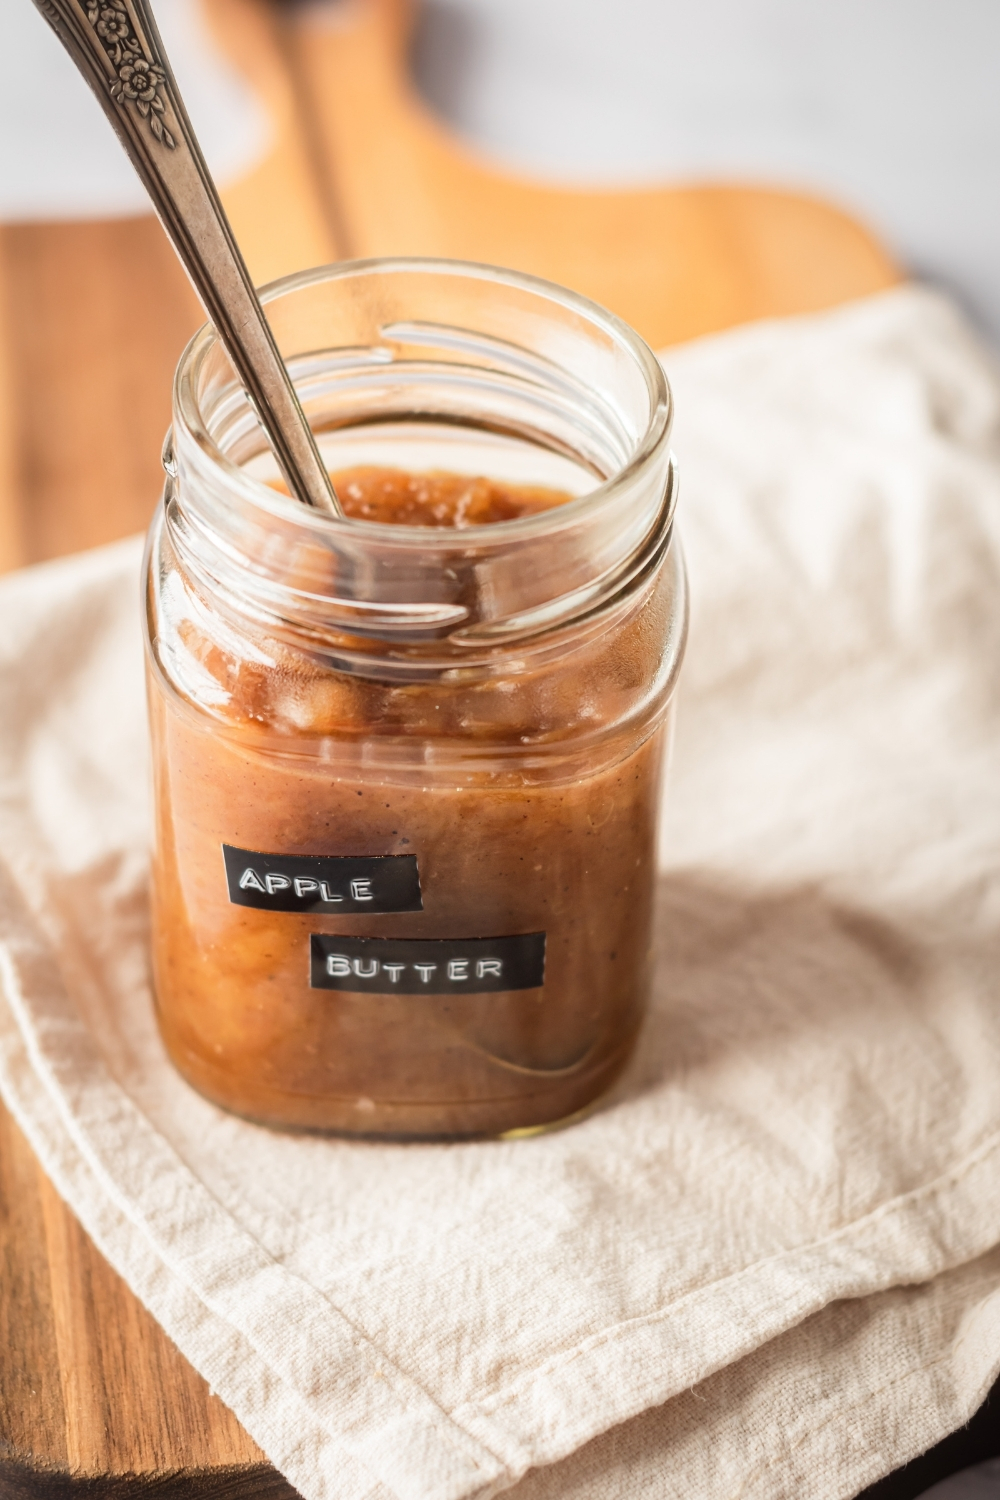 Wooden board with a tablecloth on top with a glass jar of apple butter on it. The glass jar has apple butter labeled on it and there's a spoon submerged in it.